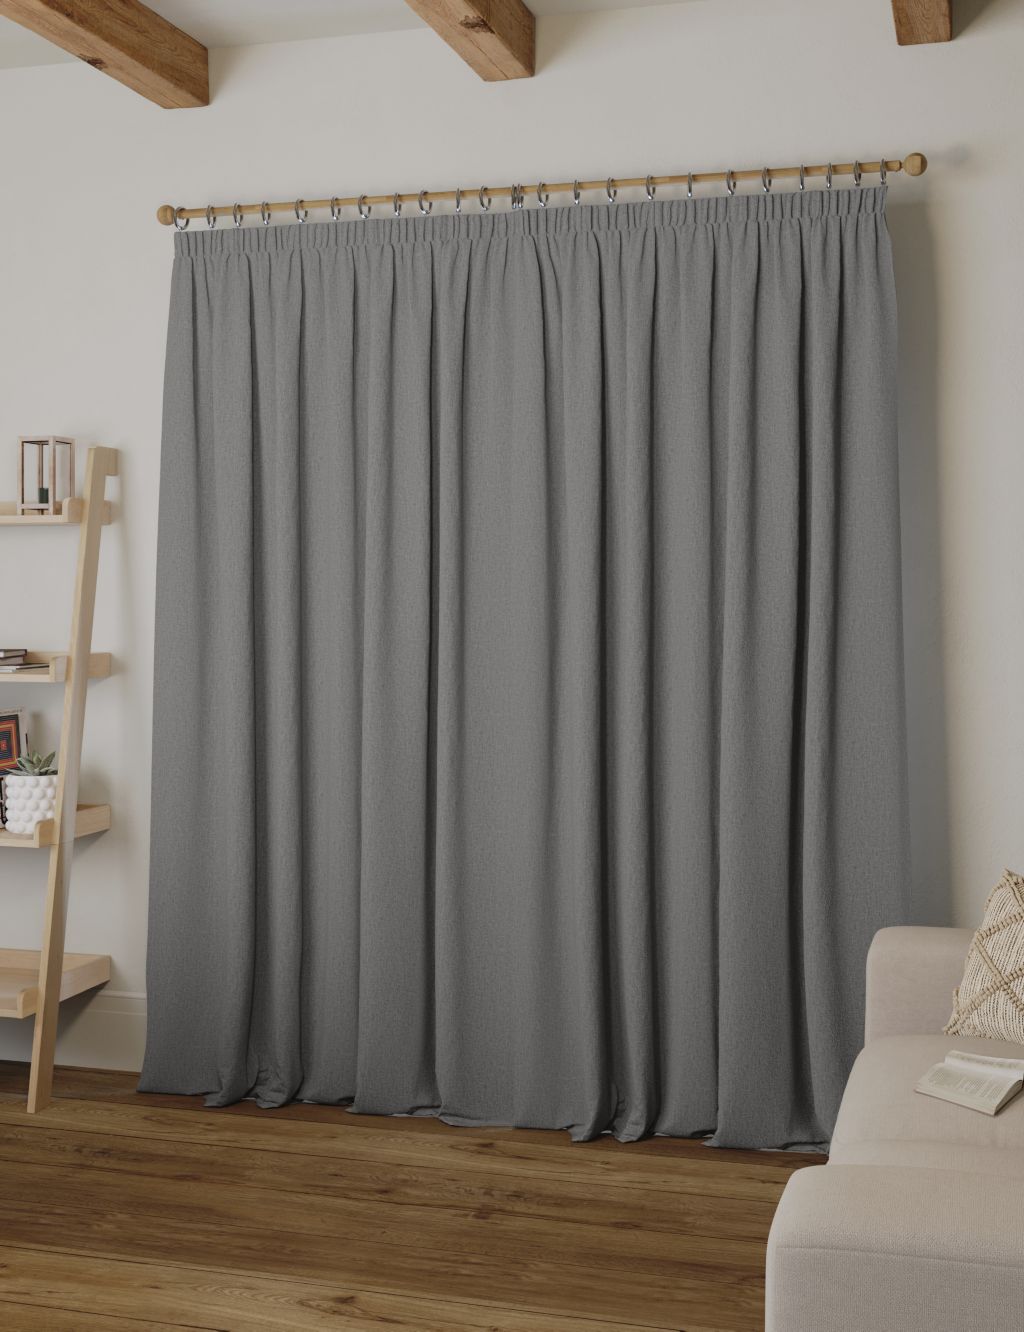 Brushed Pencil Pleat Blackout Ultra Thermal Curtains image 2